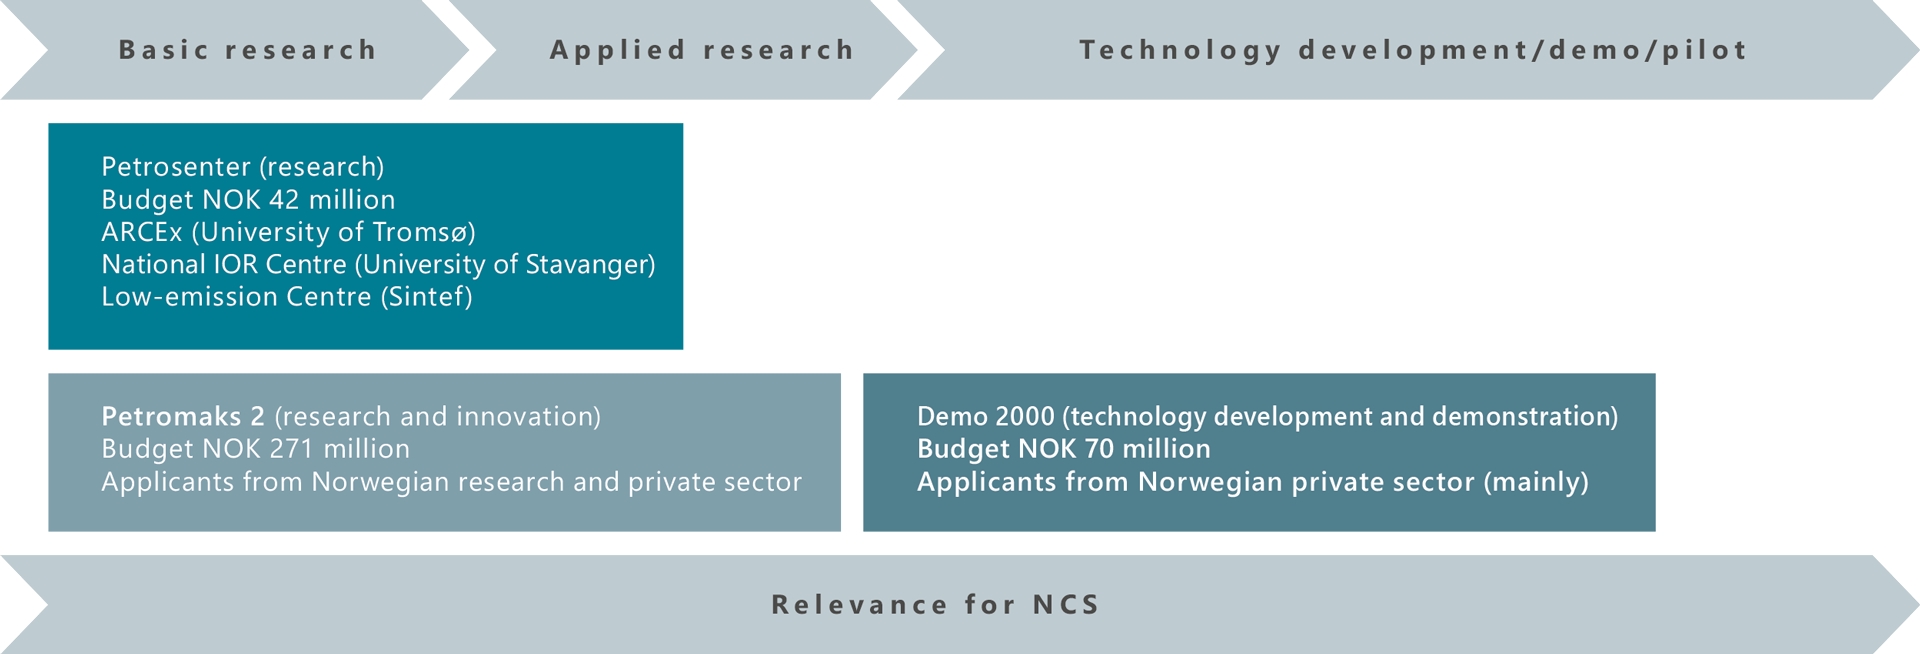 Description of research Council of Norway R&D programmes for the petroleum sector with their respetive budgets illustrated with text in boxes